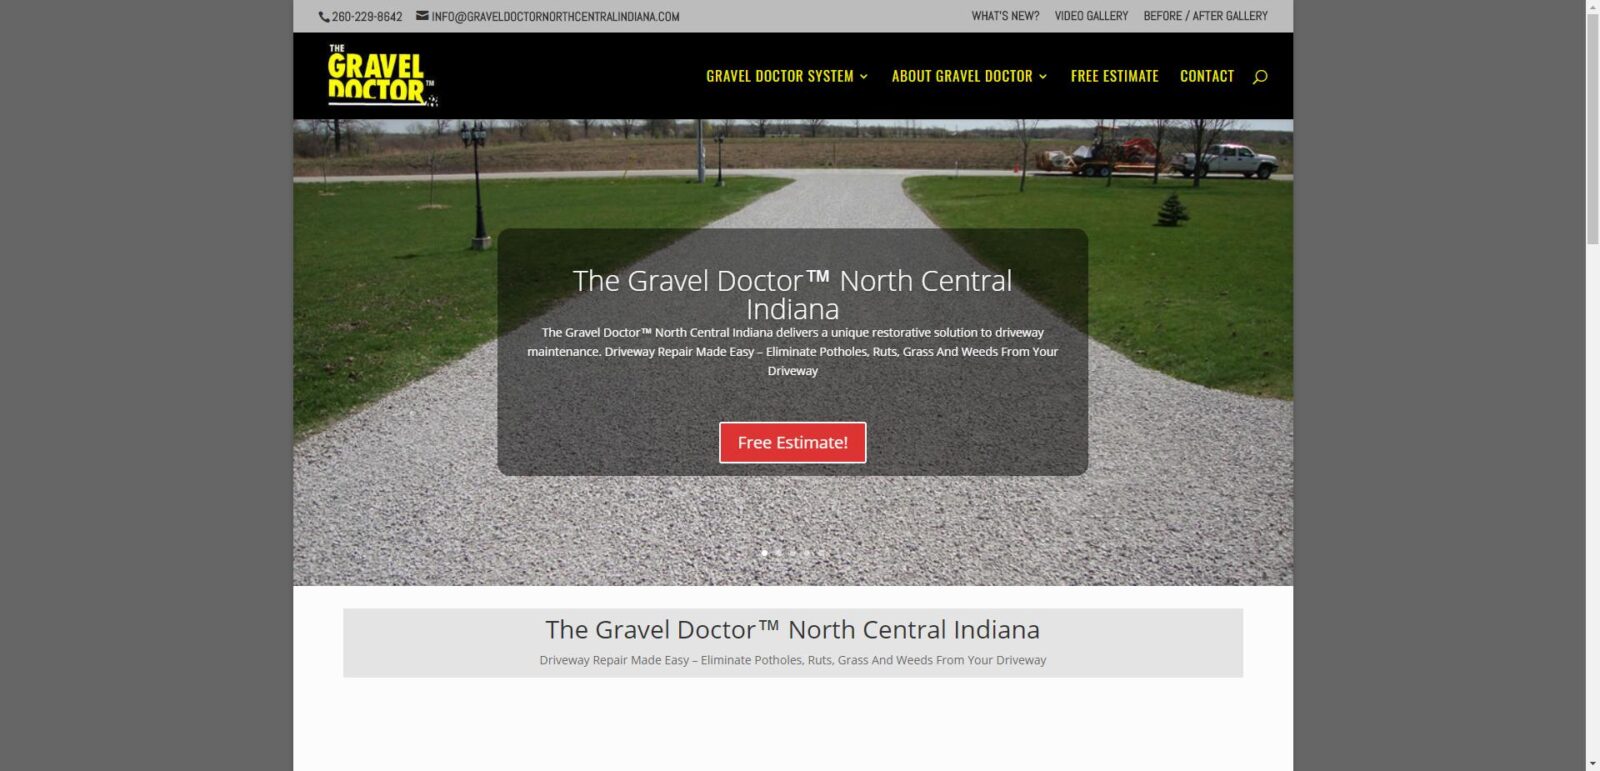 The Gravel Doctor® North Central Indiana